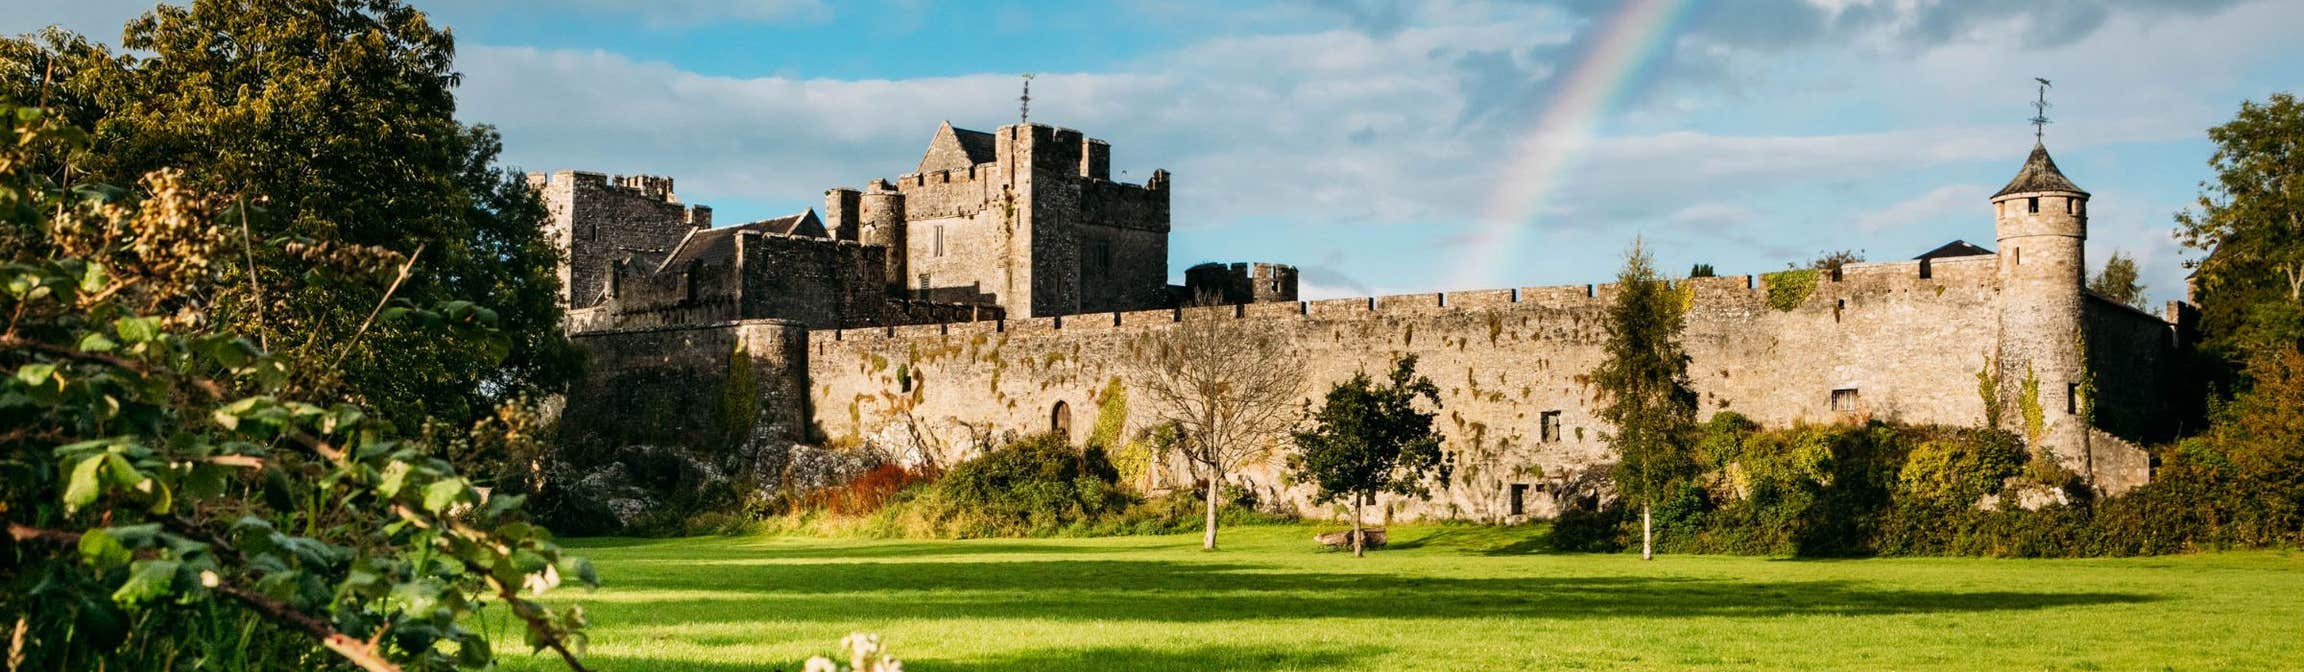 Image of Cahir Castle in County Tipperary